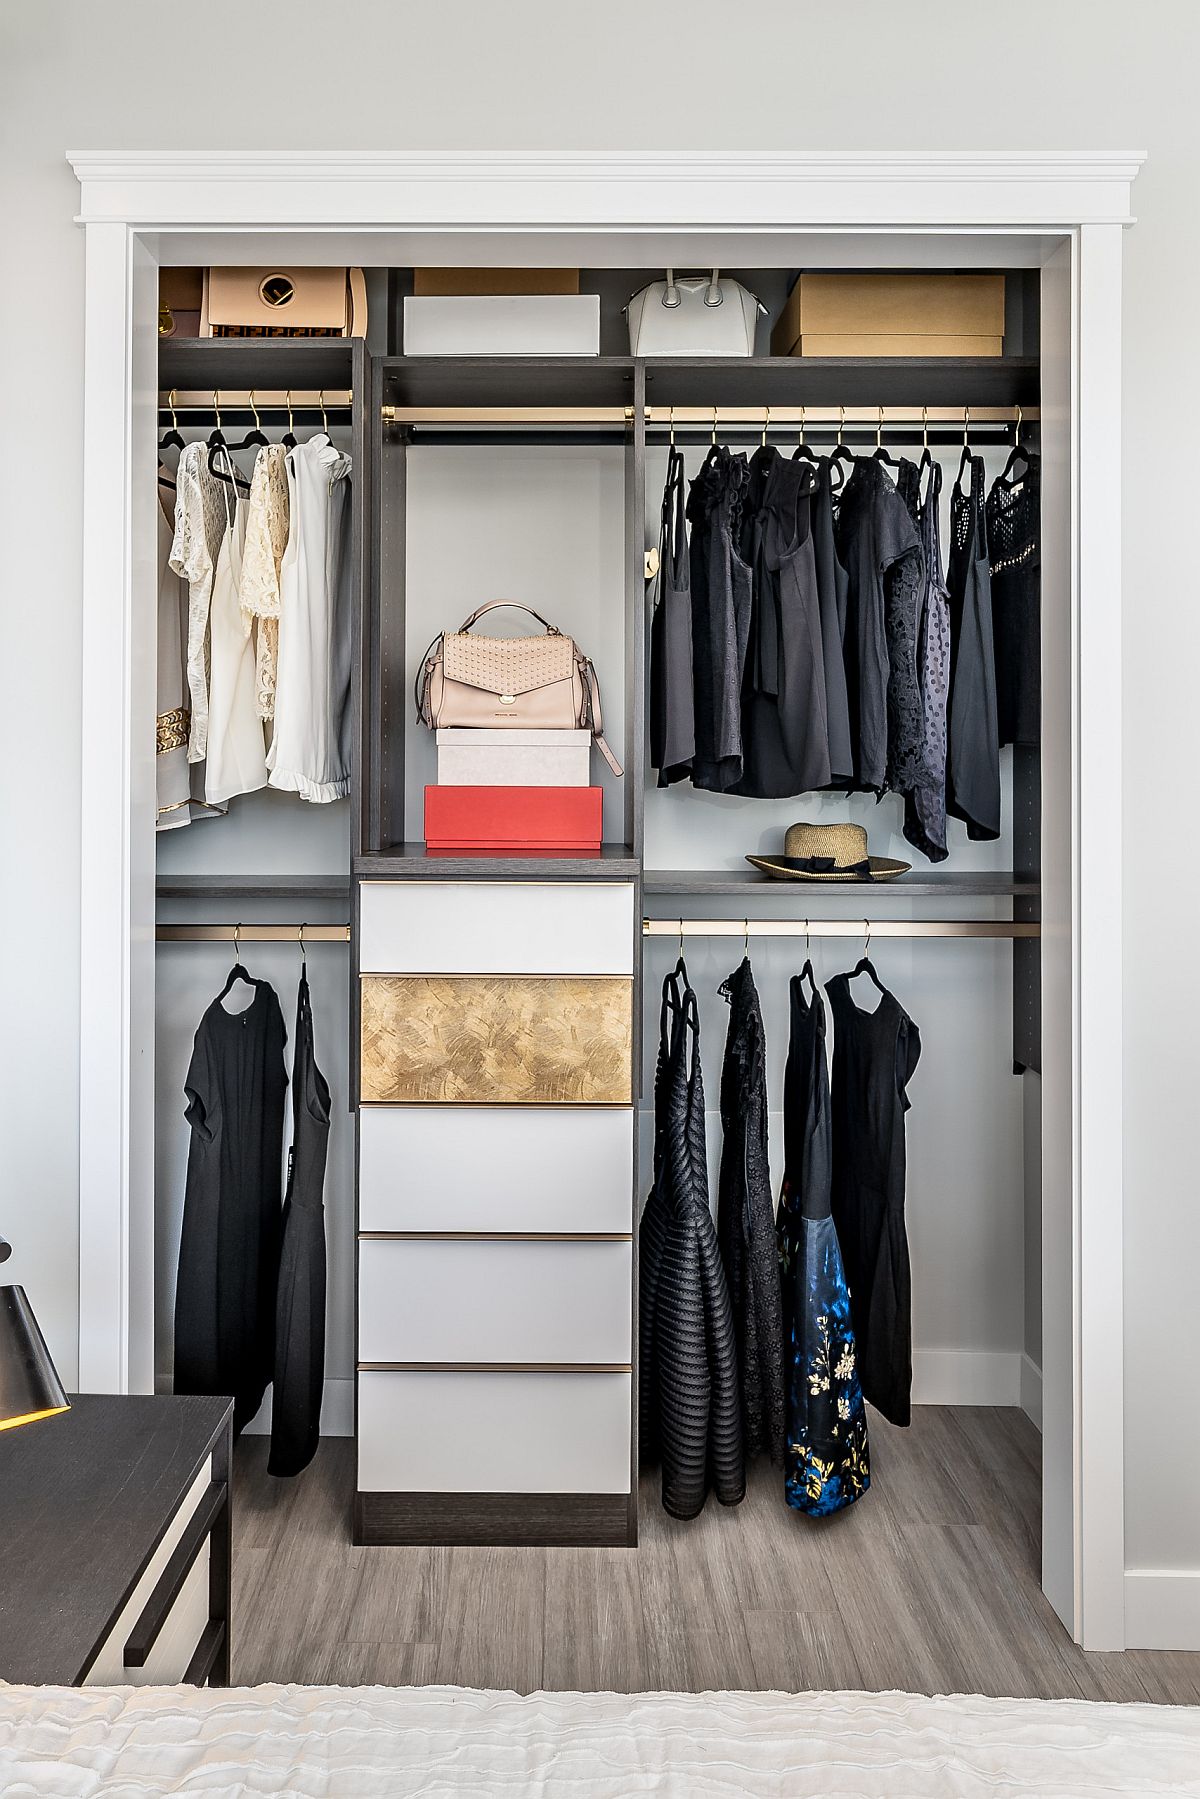 Modern minimal bedroom closet is easy on the eyes thanks to smart organization